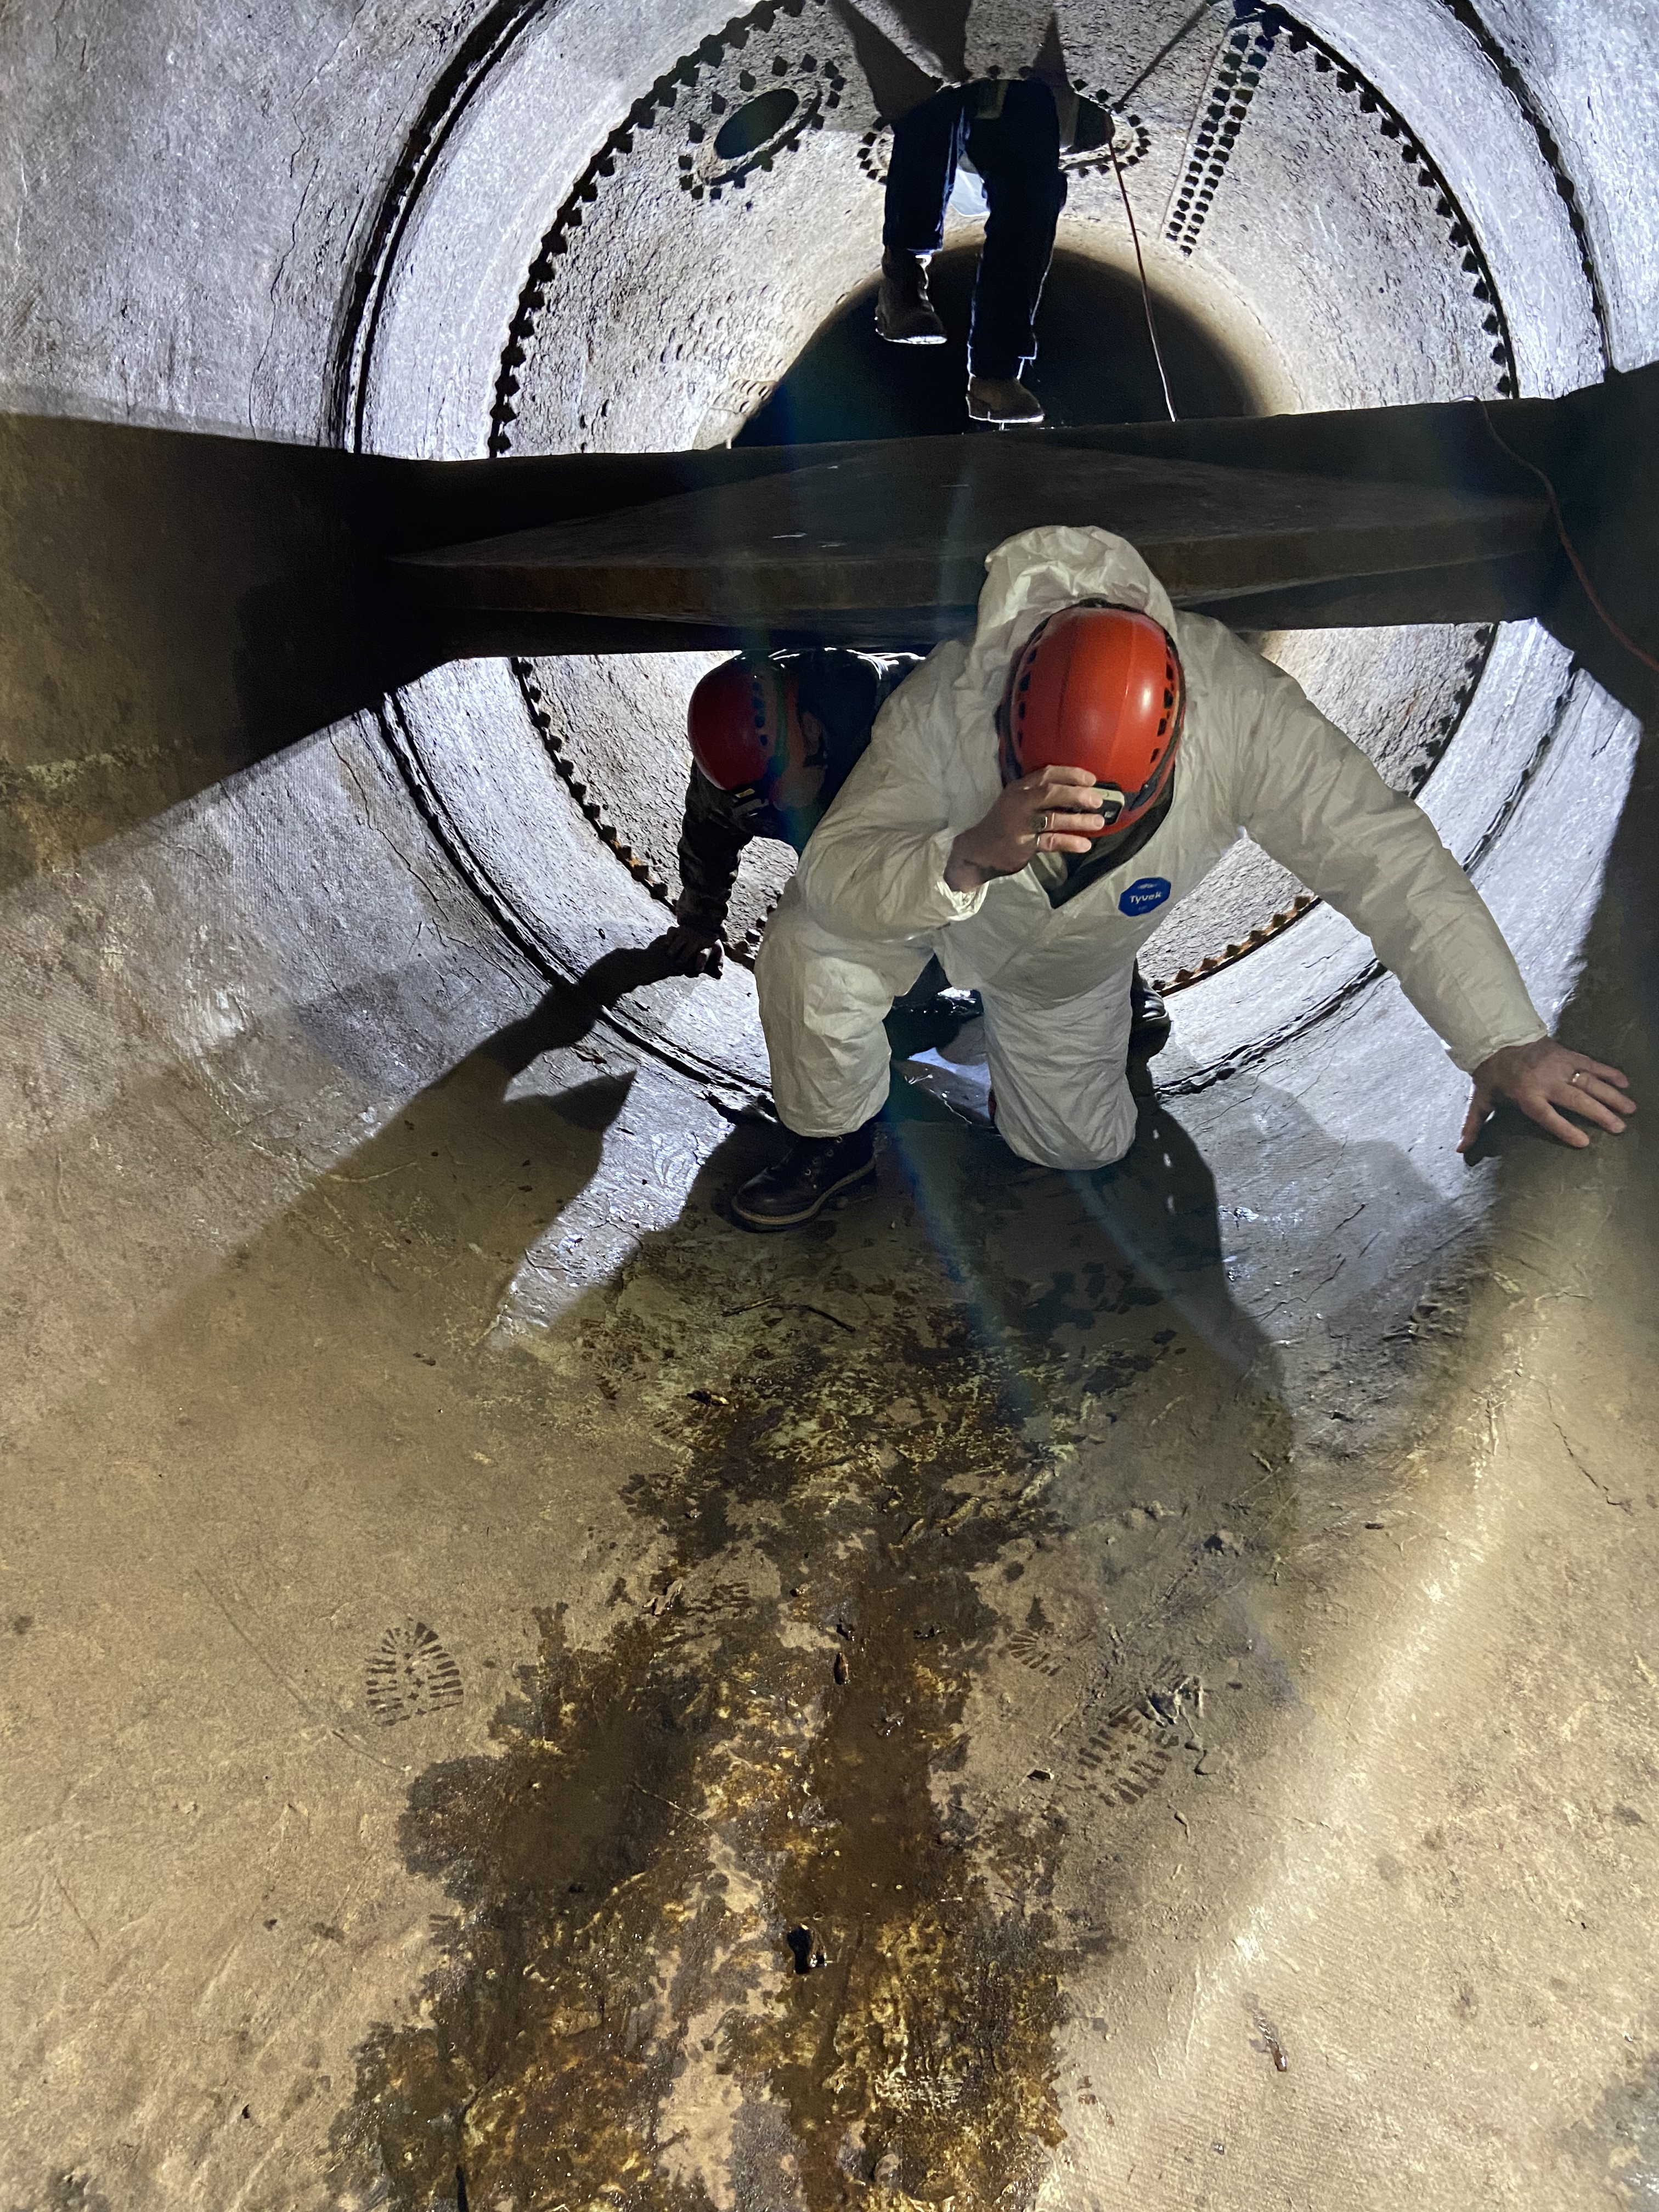 Honorable mention photo by Wei Liao : Lake Lure, NC “Lake Lure Dam penstock rehabilitation project. Dr. Tom Iseley, a 77-year-old pioneer in underground infrastructure, is actively engaged on the frontlines.”